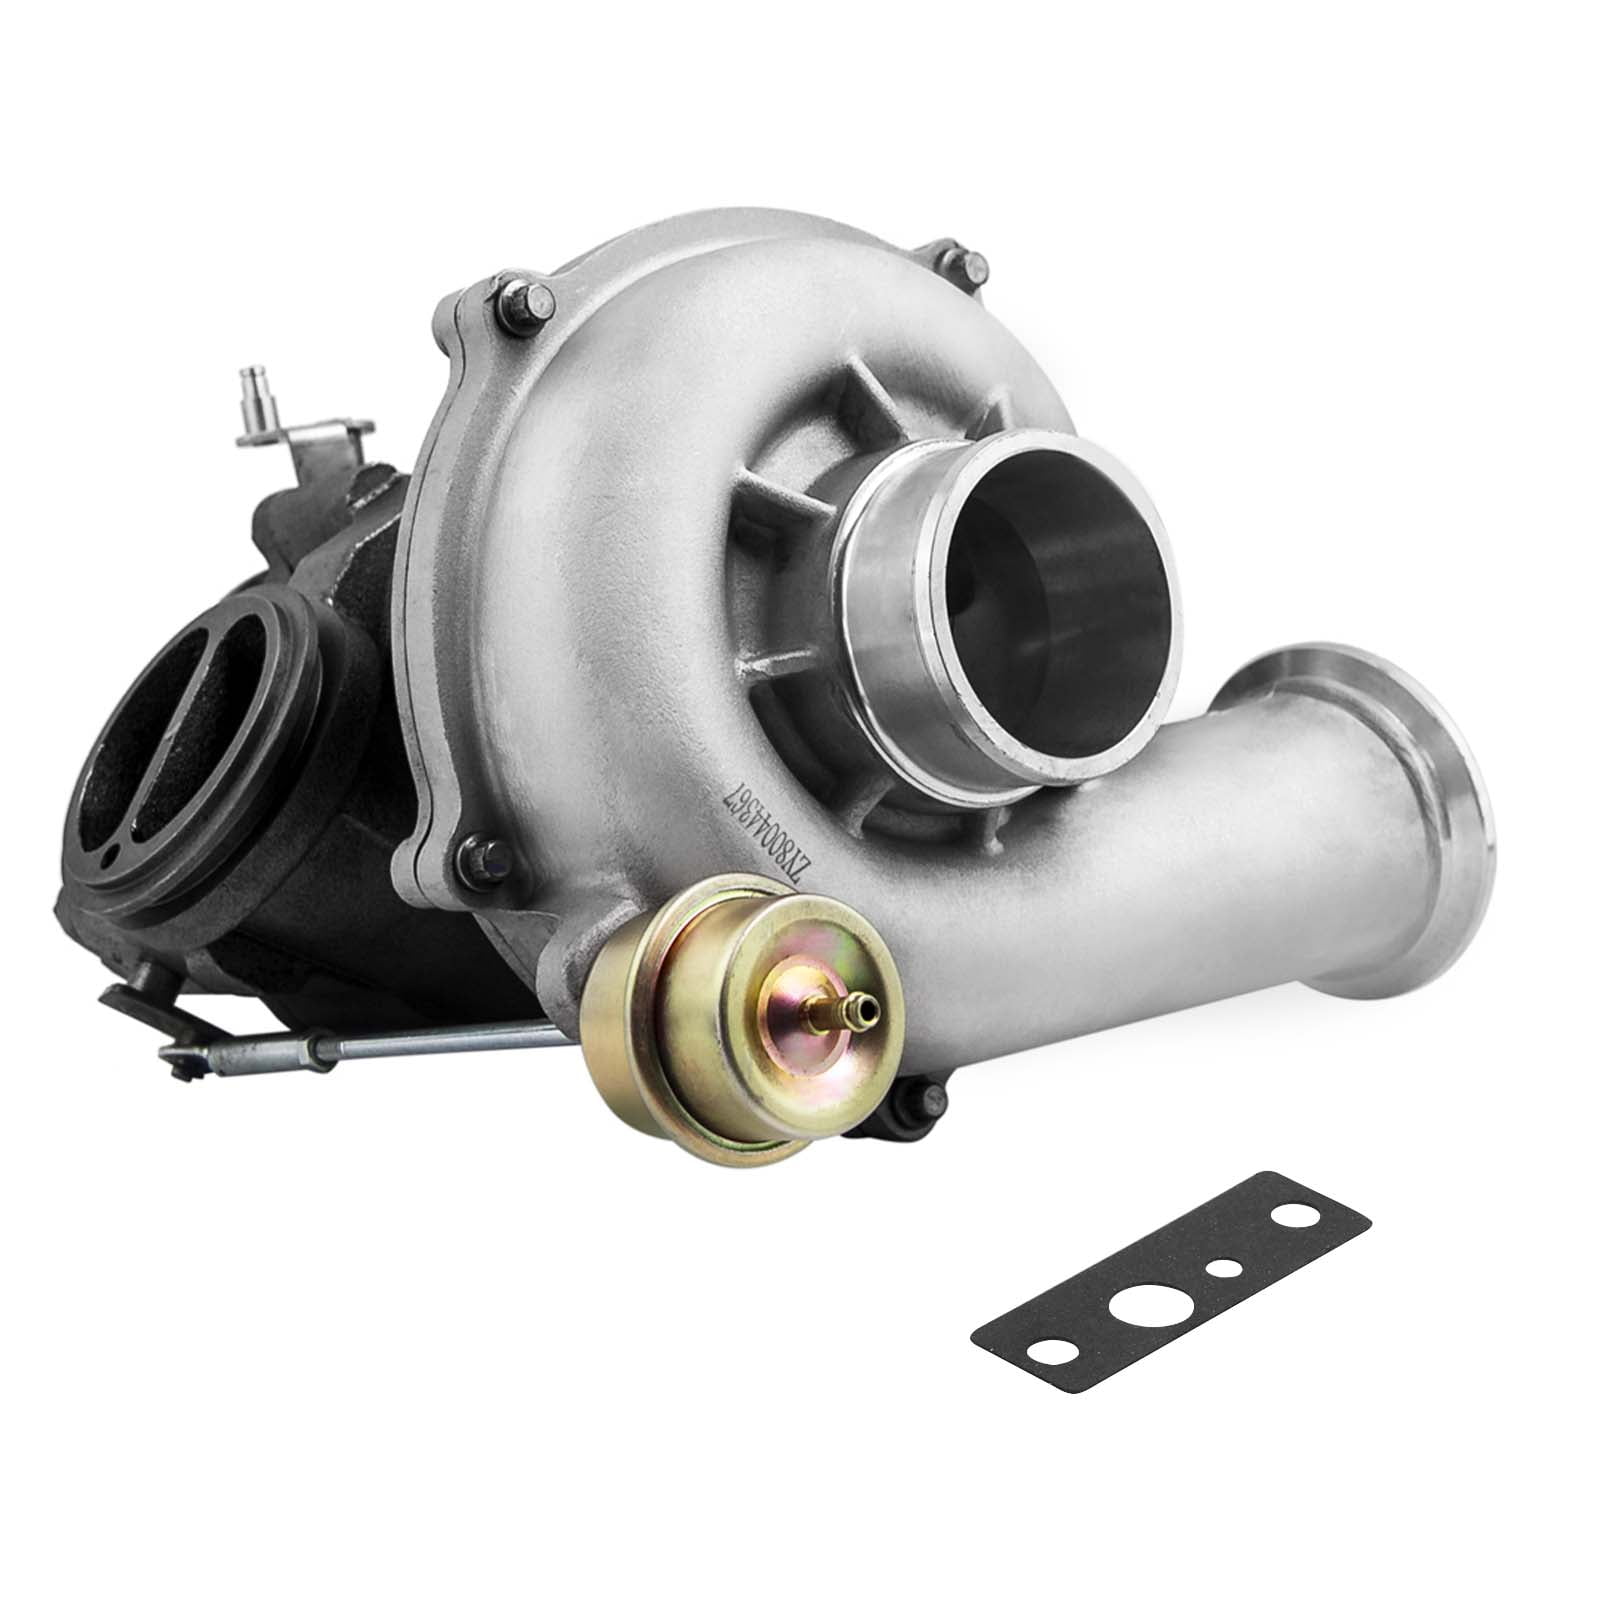 Maxpeedingrods GTP38 Turbocharger for Ford Excursion 7.3L Powerstroke F250 F350 F450 2000-2003 1831383C92